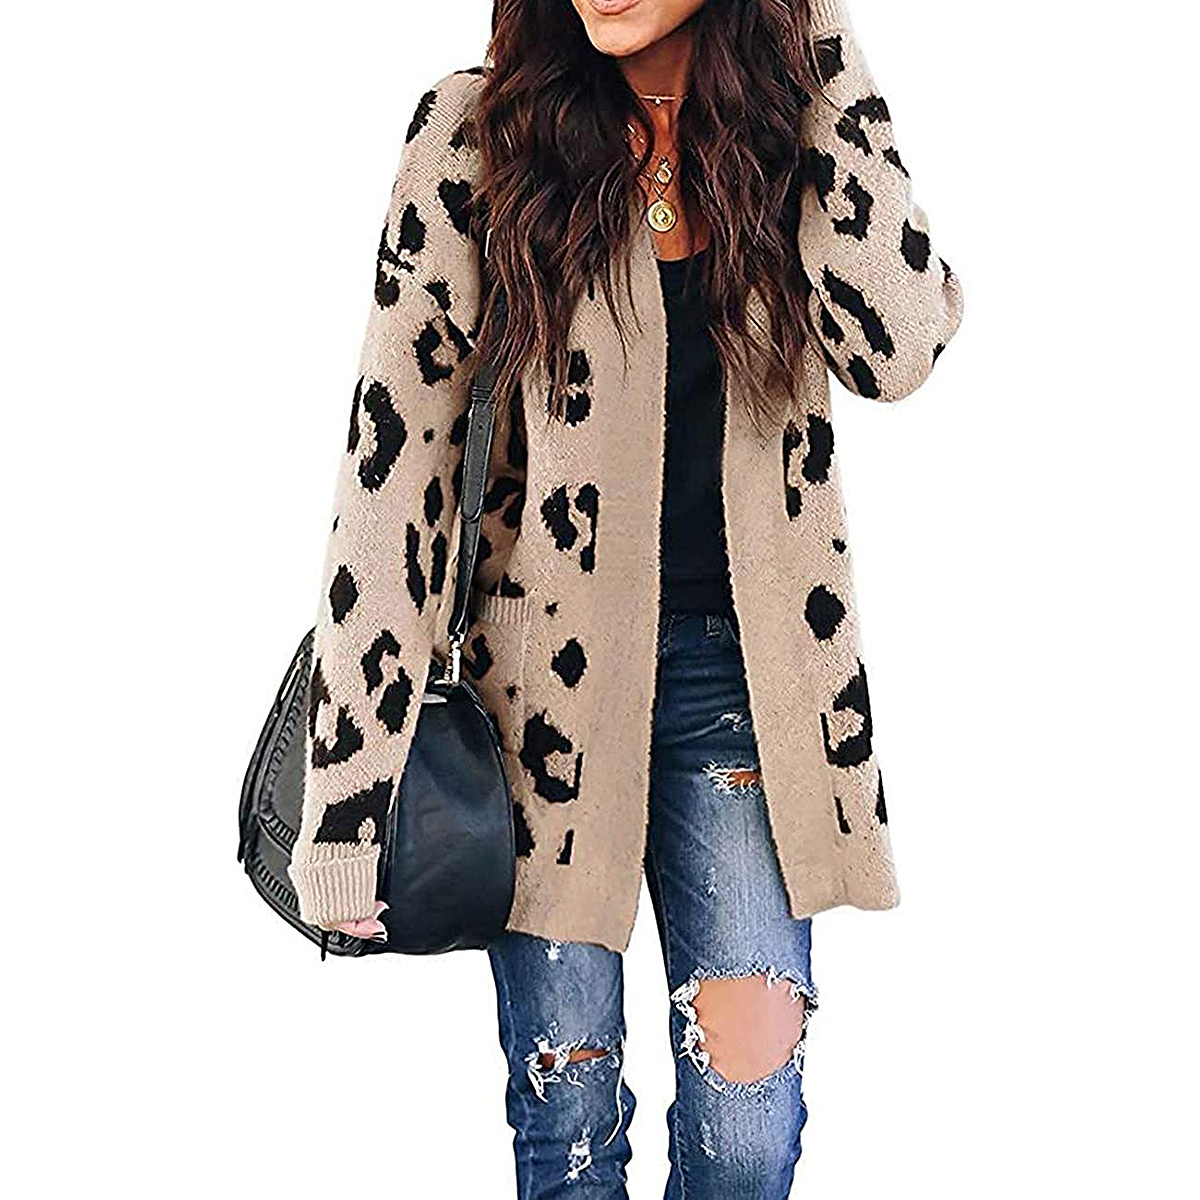 This Fierce Leopard Cardigan Will Show You What Fall Fun Is All About ...